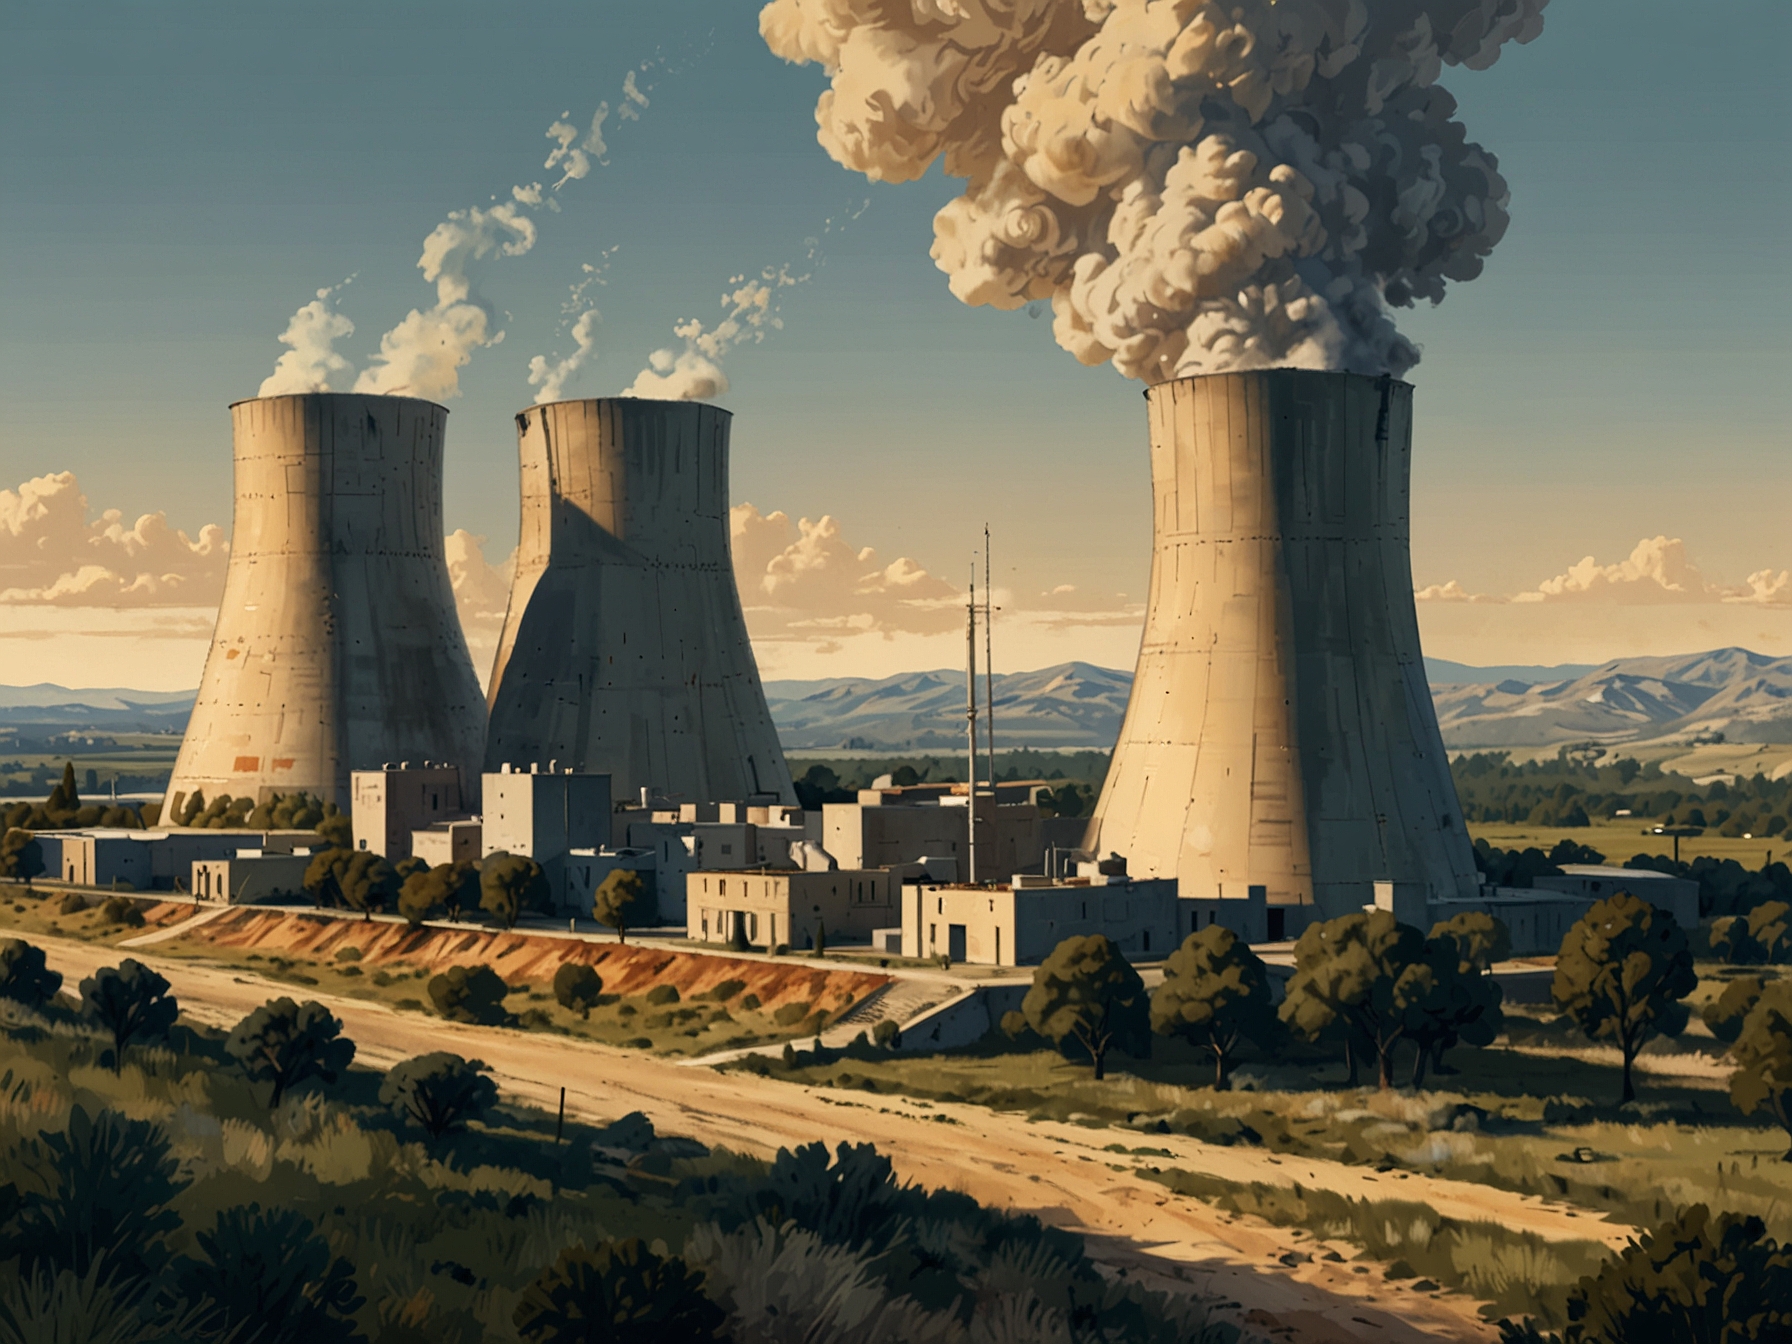 Illustration of Vaucluse with a hypothetical nuclear reactor, symbolizing the contentious debate over nuclear power in affluent and environmentally conscious areas.